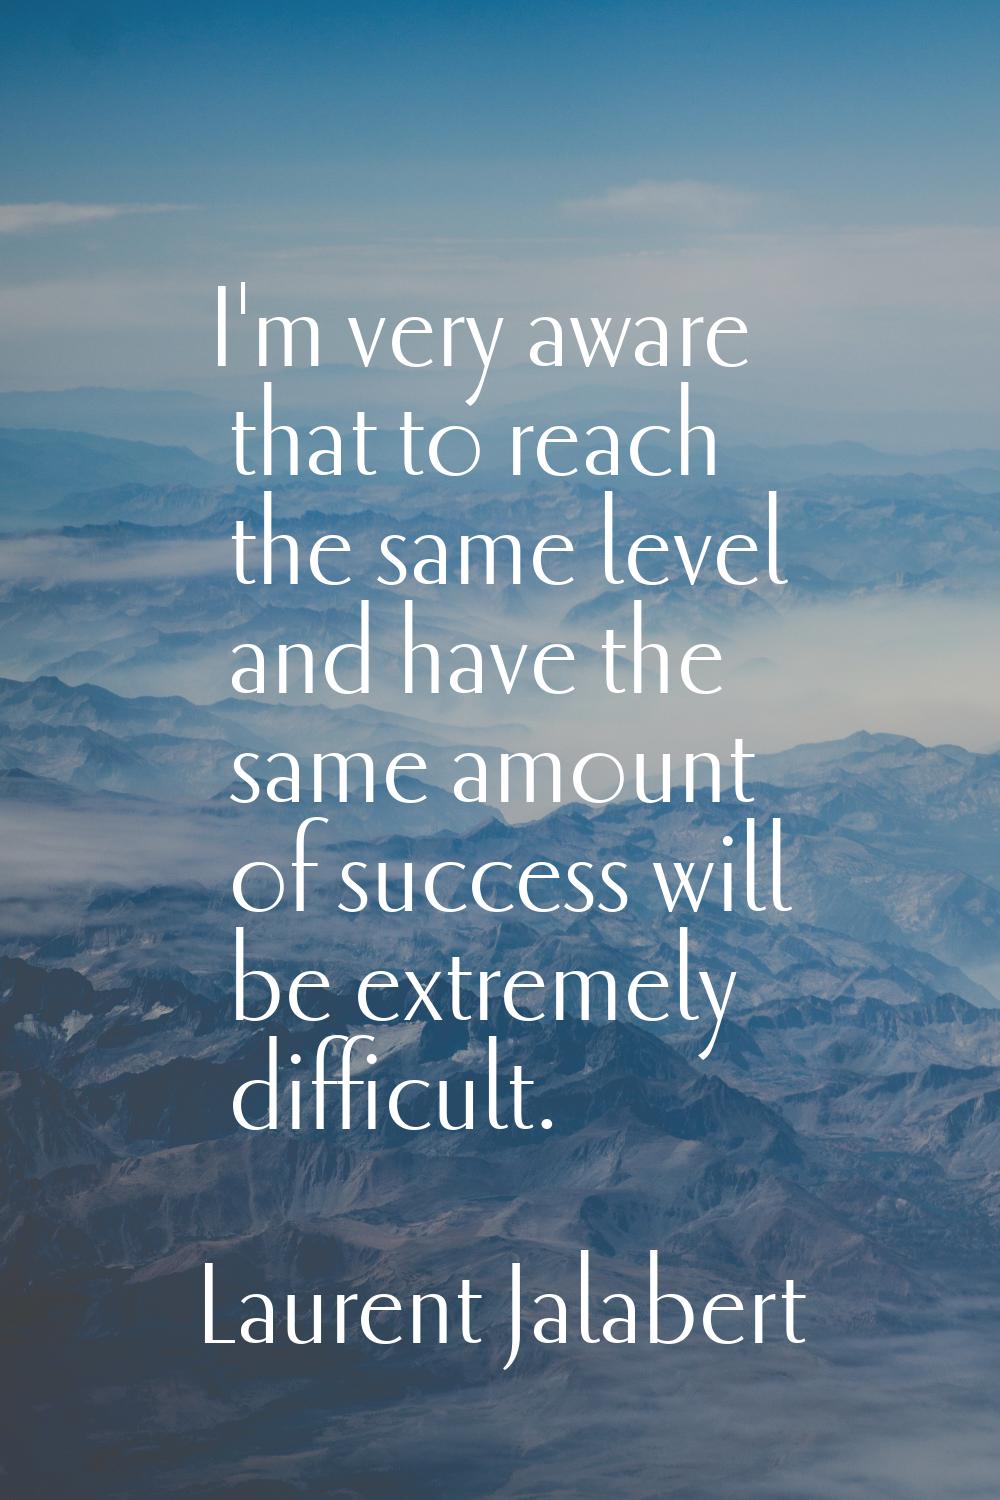 I'm very aware that to reach the same level and have the same amount of success will be extremely d